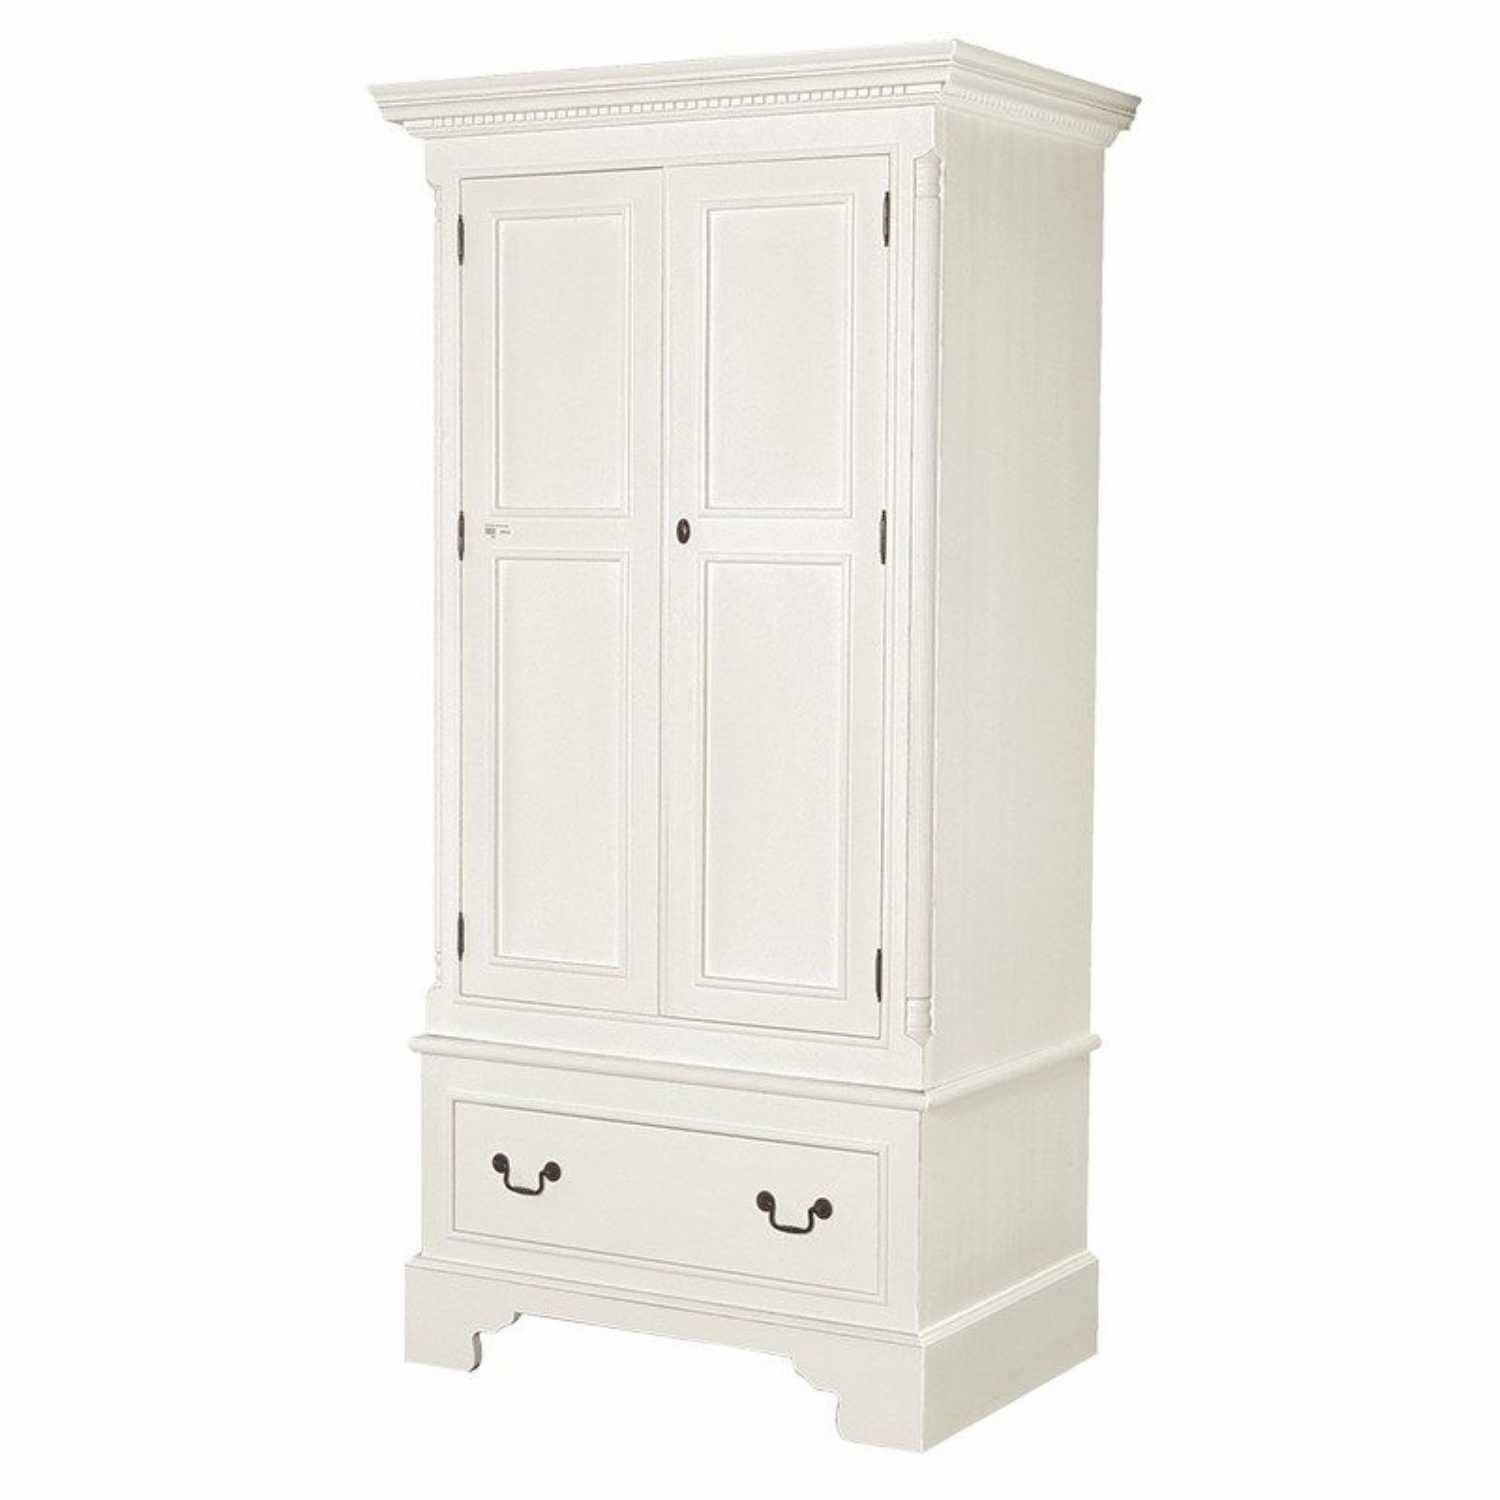 Georgian Shabby Chic White Painted Small Double Wardrobe With Drawer Throughout Shabby Chic White Wardrobes (View 9 of 15)